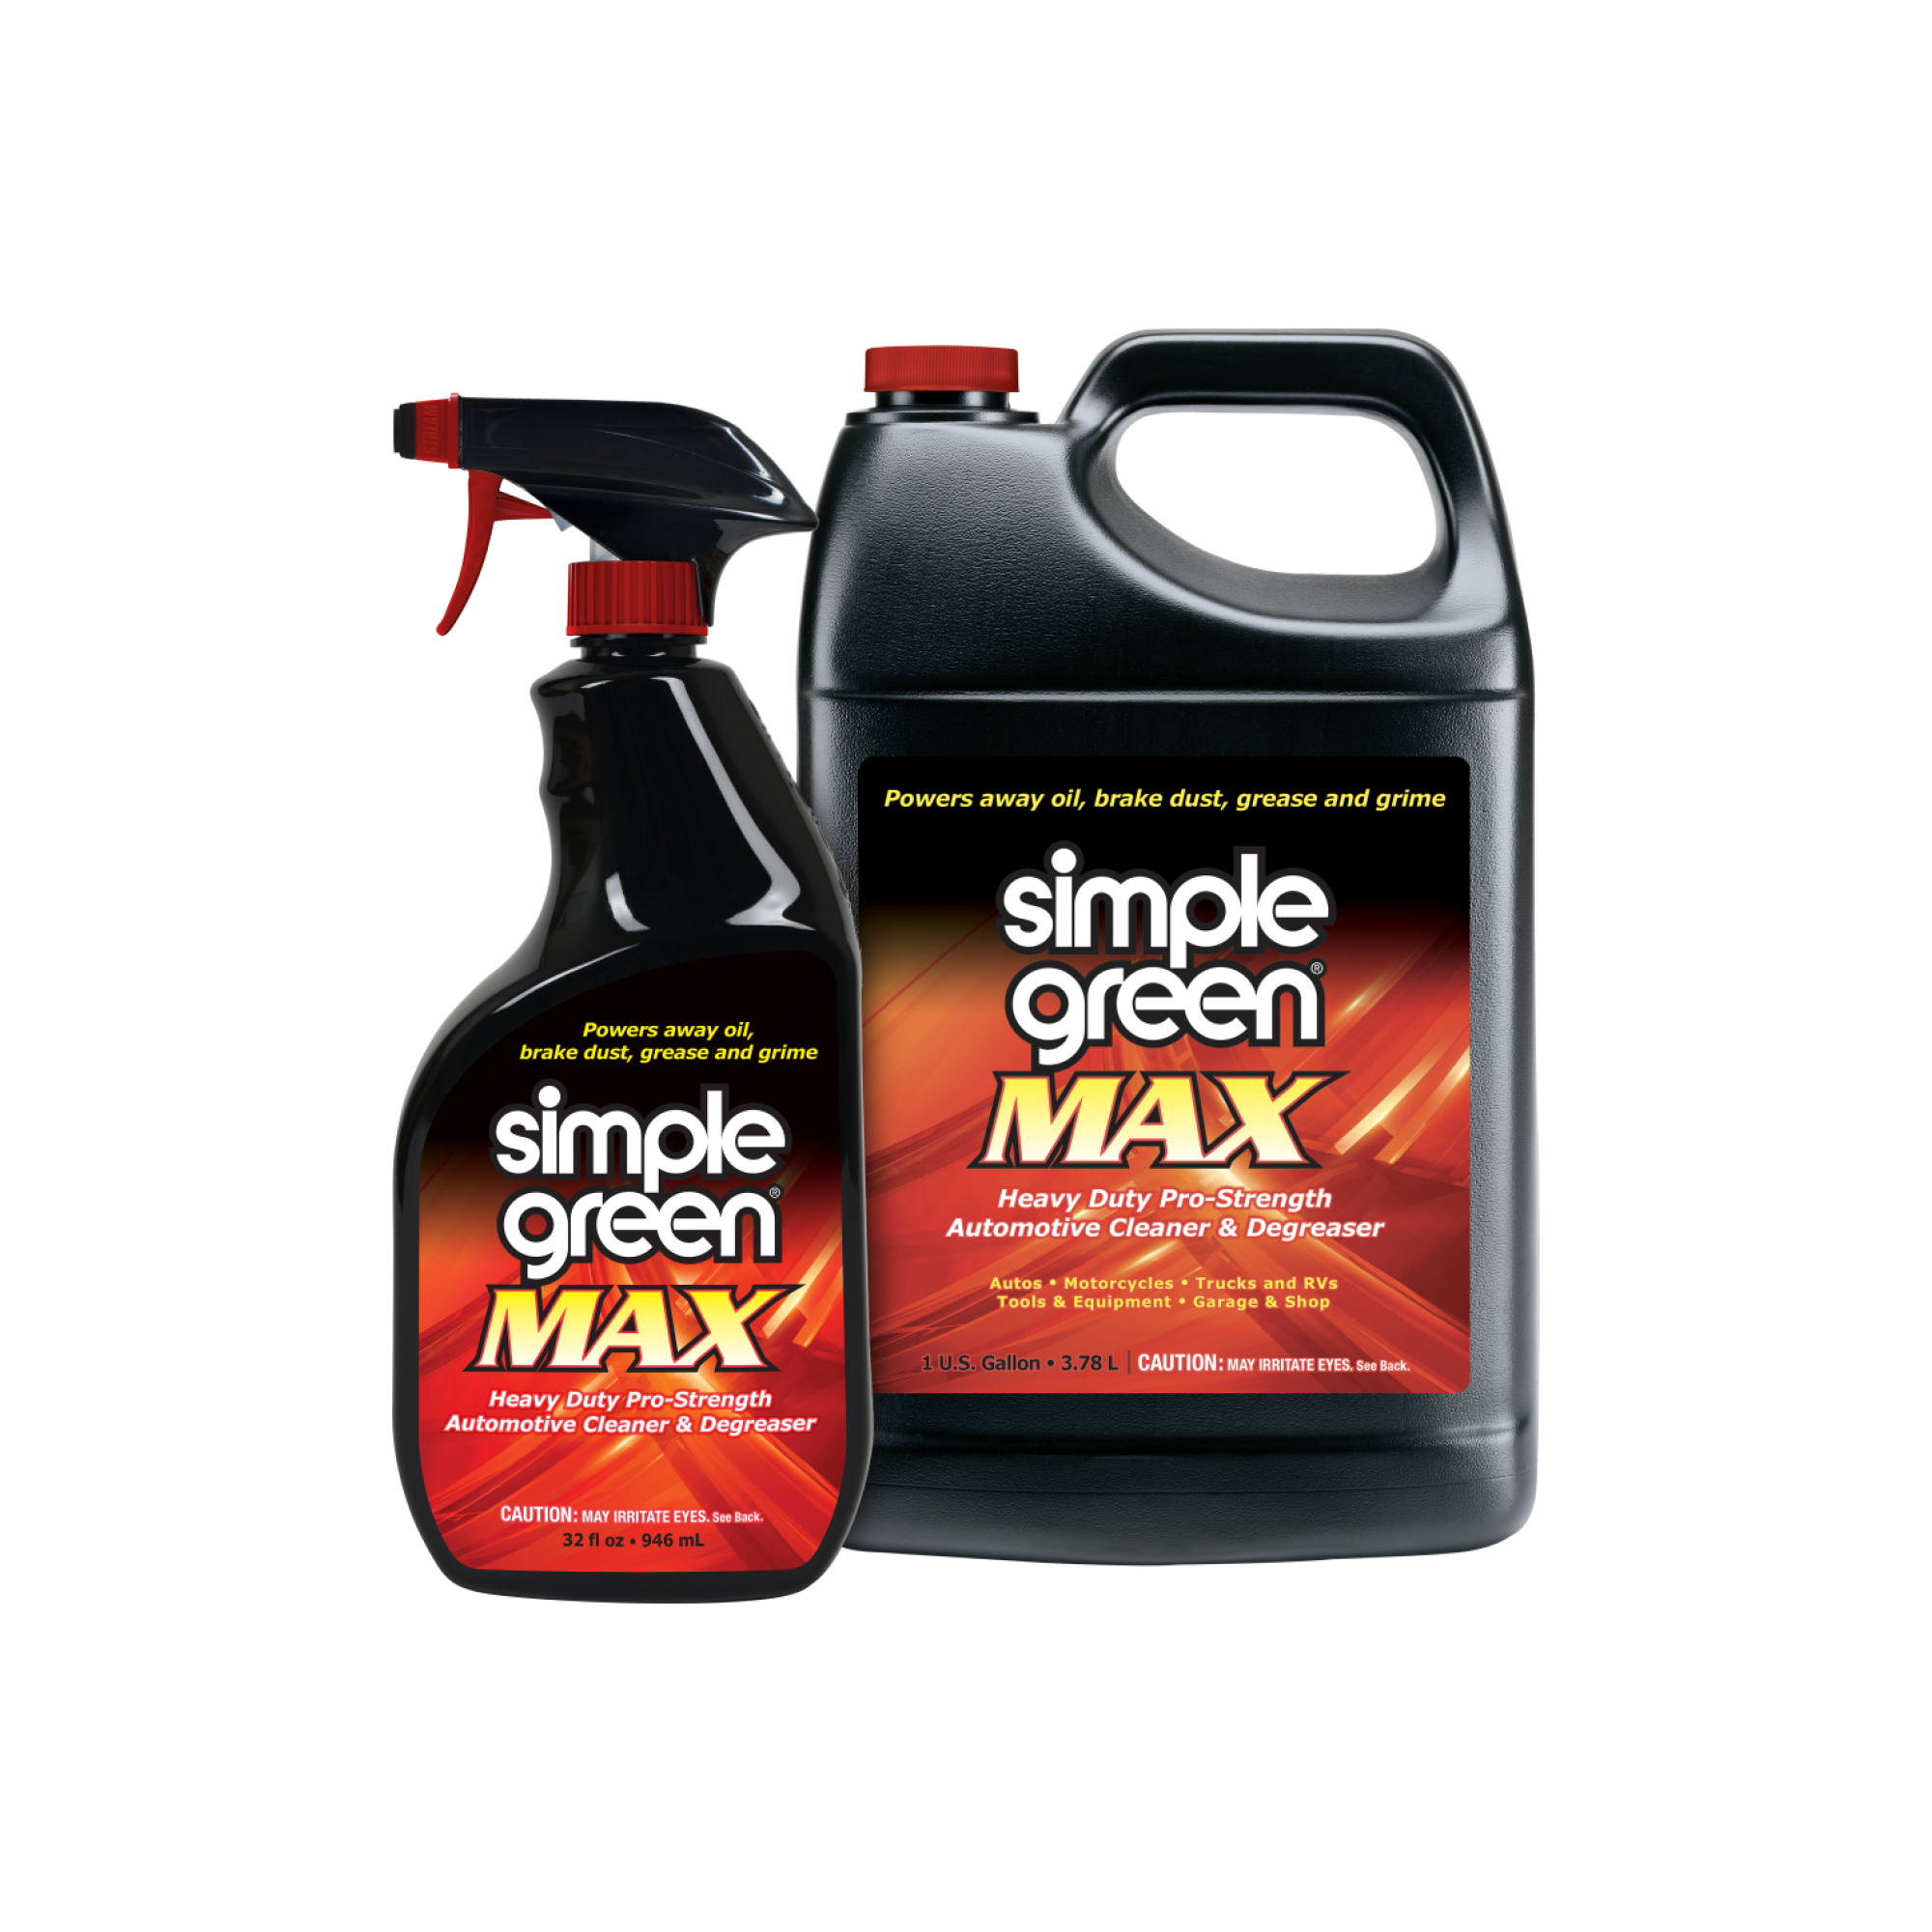 Simple Green 32 oz. Extreme Motorsports Cleaner and Degreaser